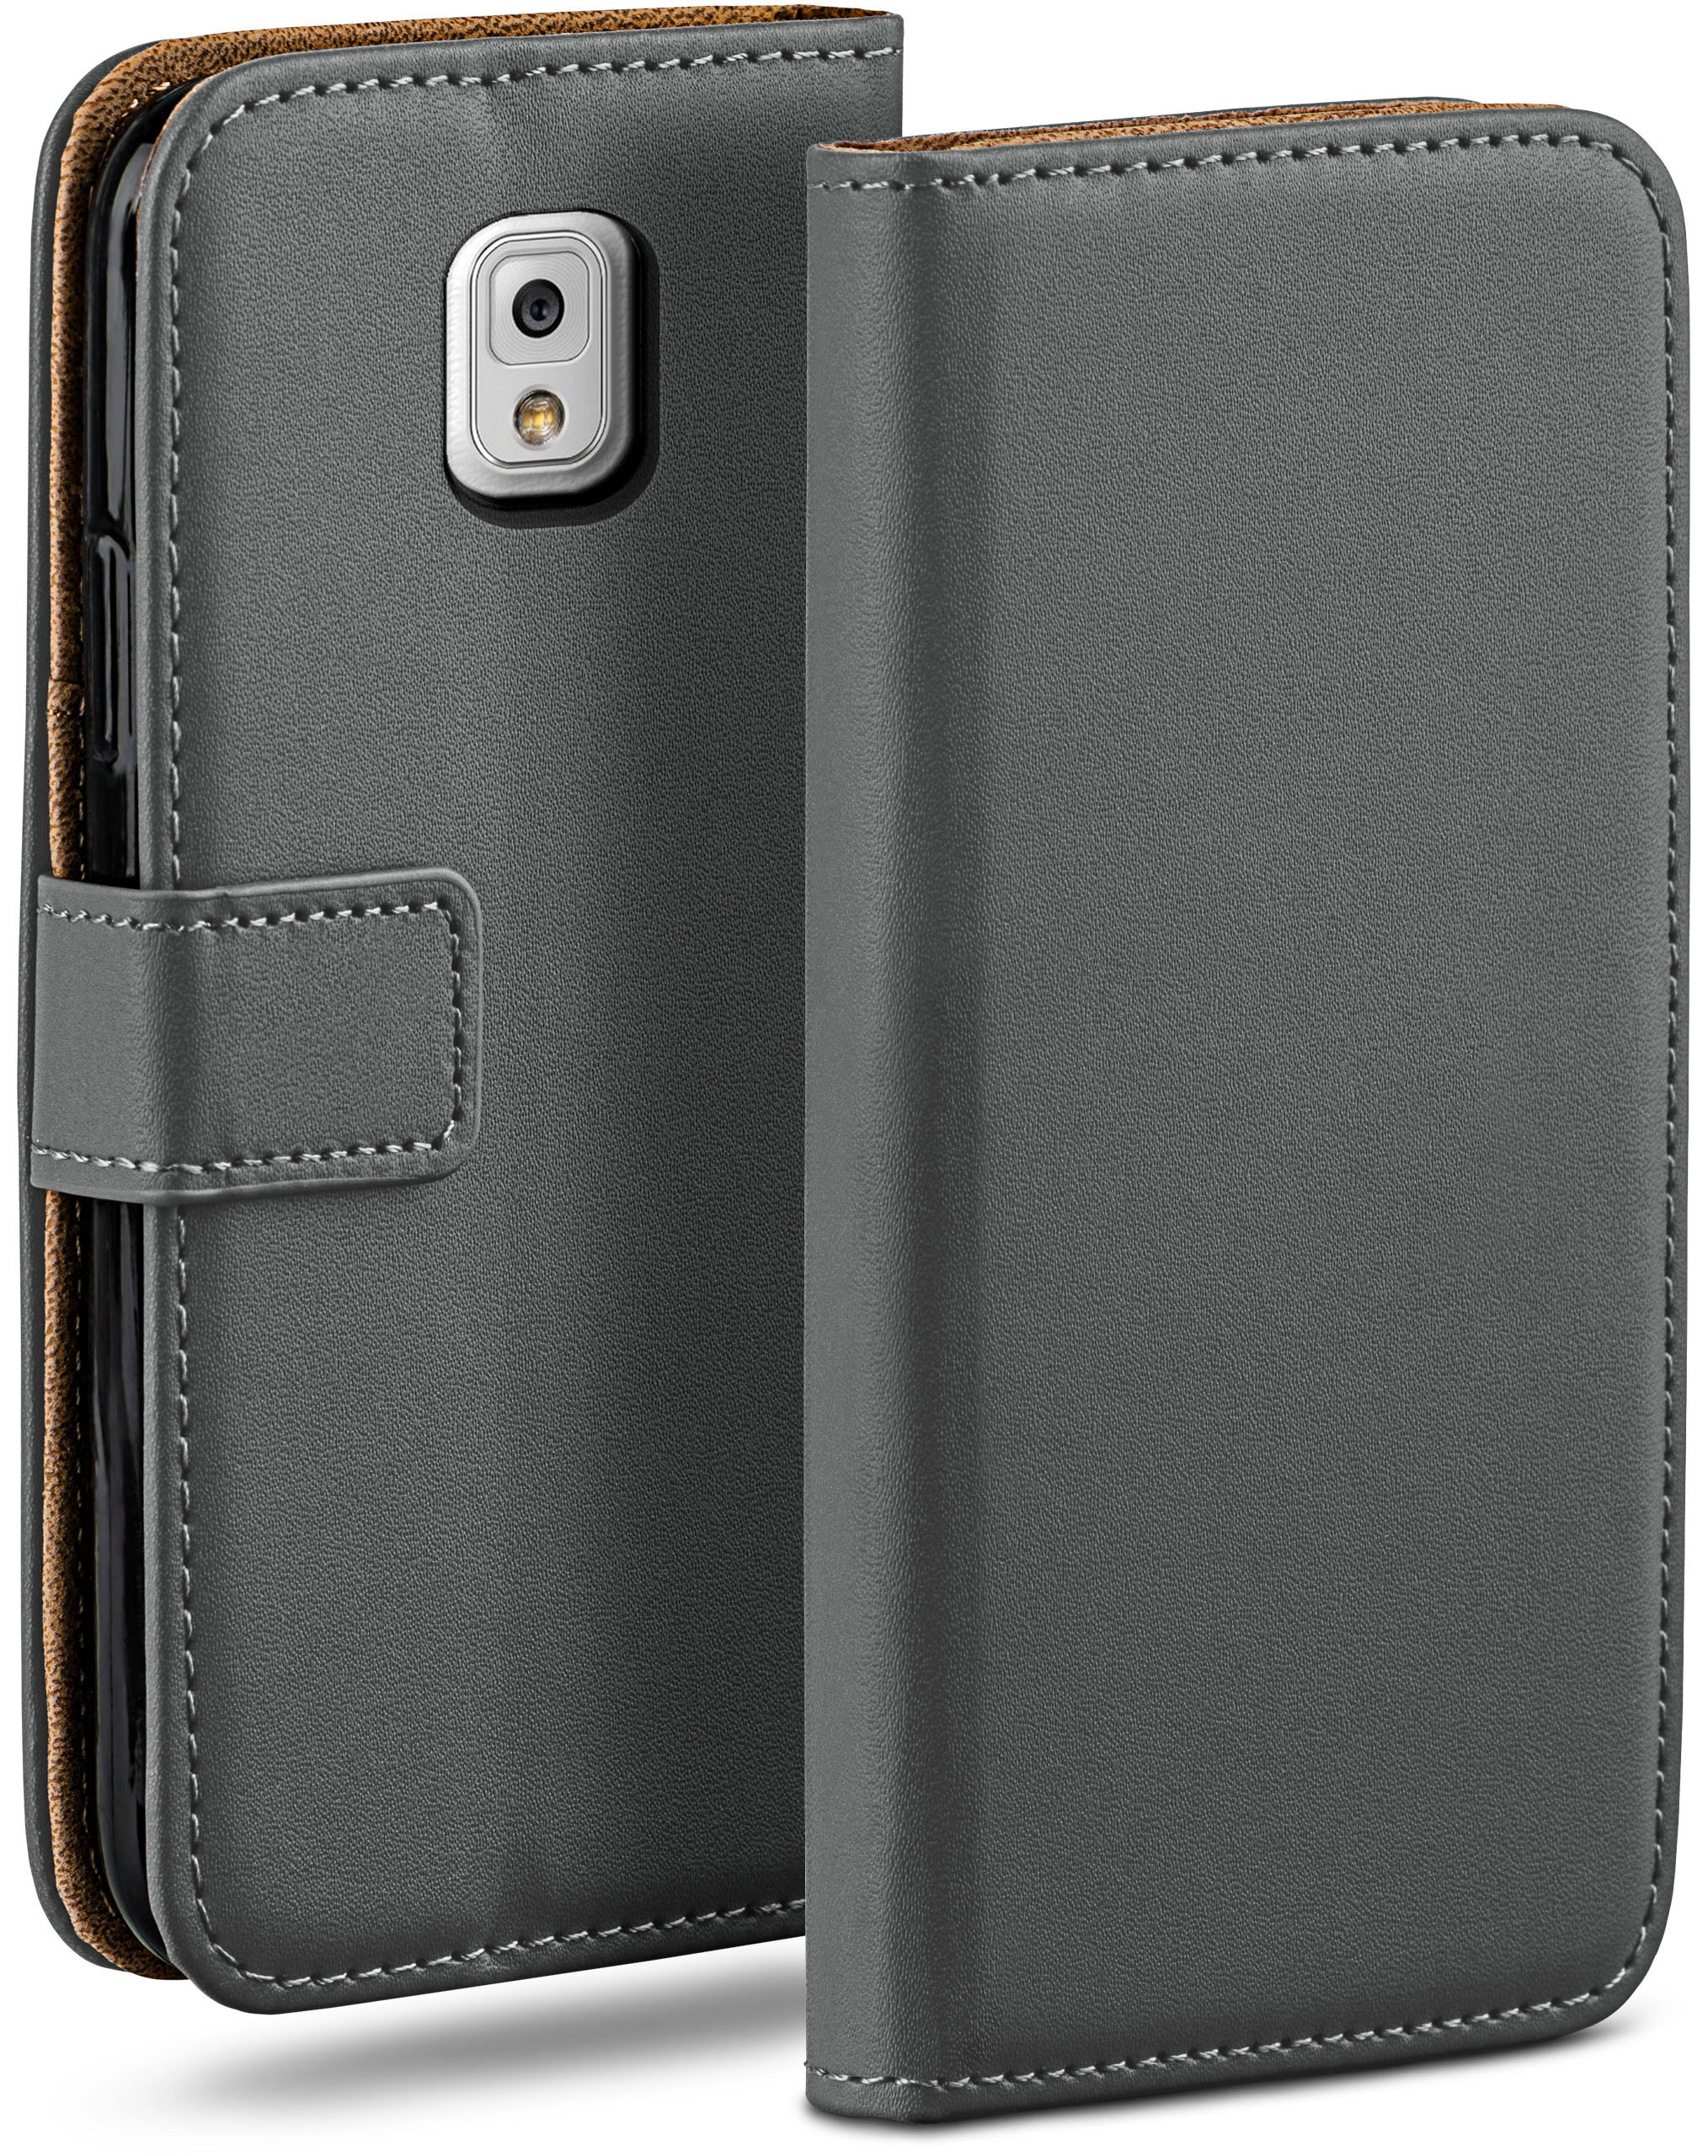 MOEX Case, Galaxy 3, Book Samsung, Note Bookcover, Anthracite-Gray